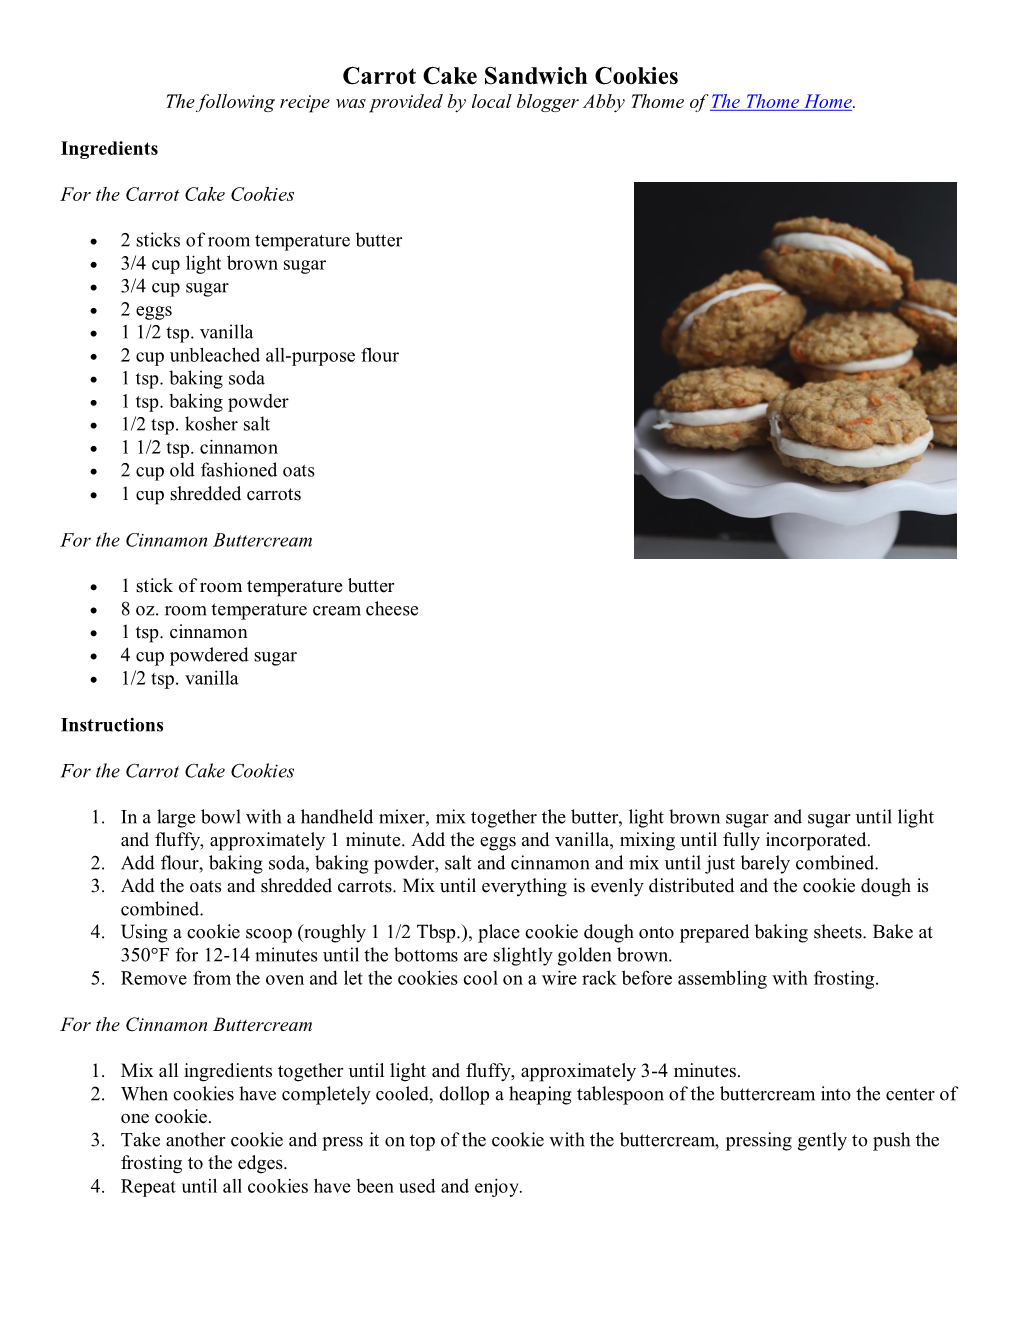 To Print the Recipe for Carrot Cake Sandwich Cookies